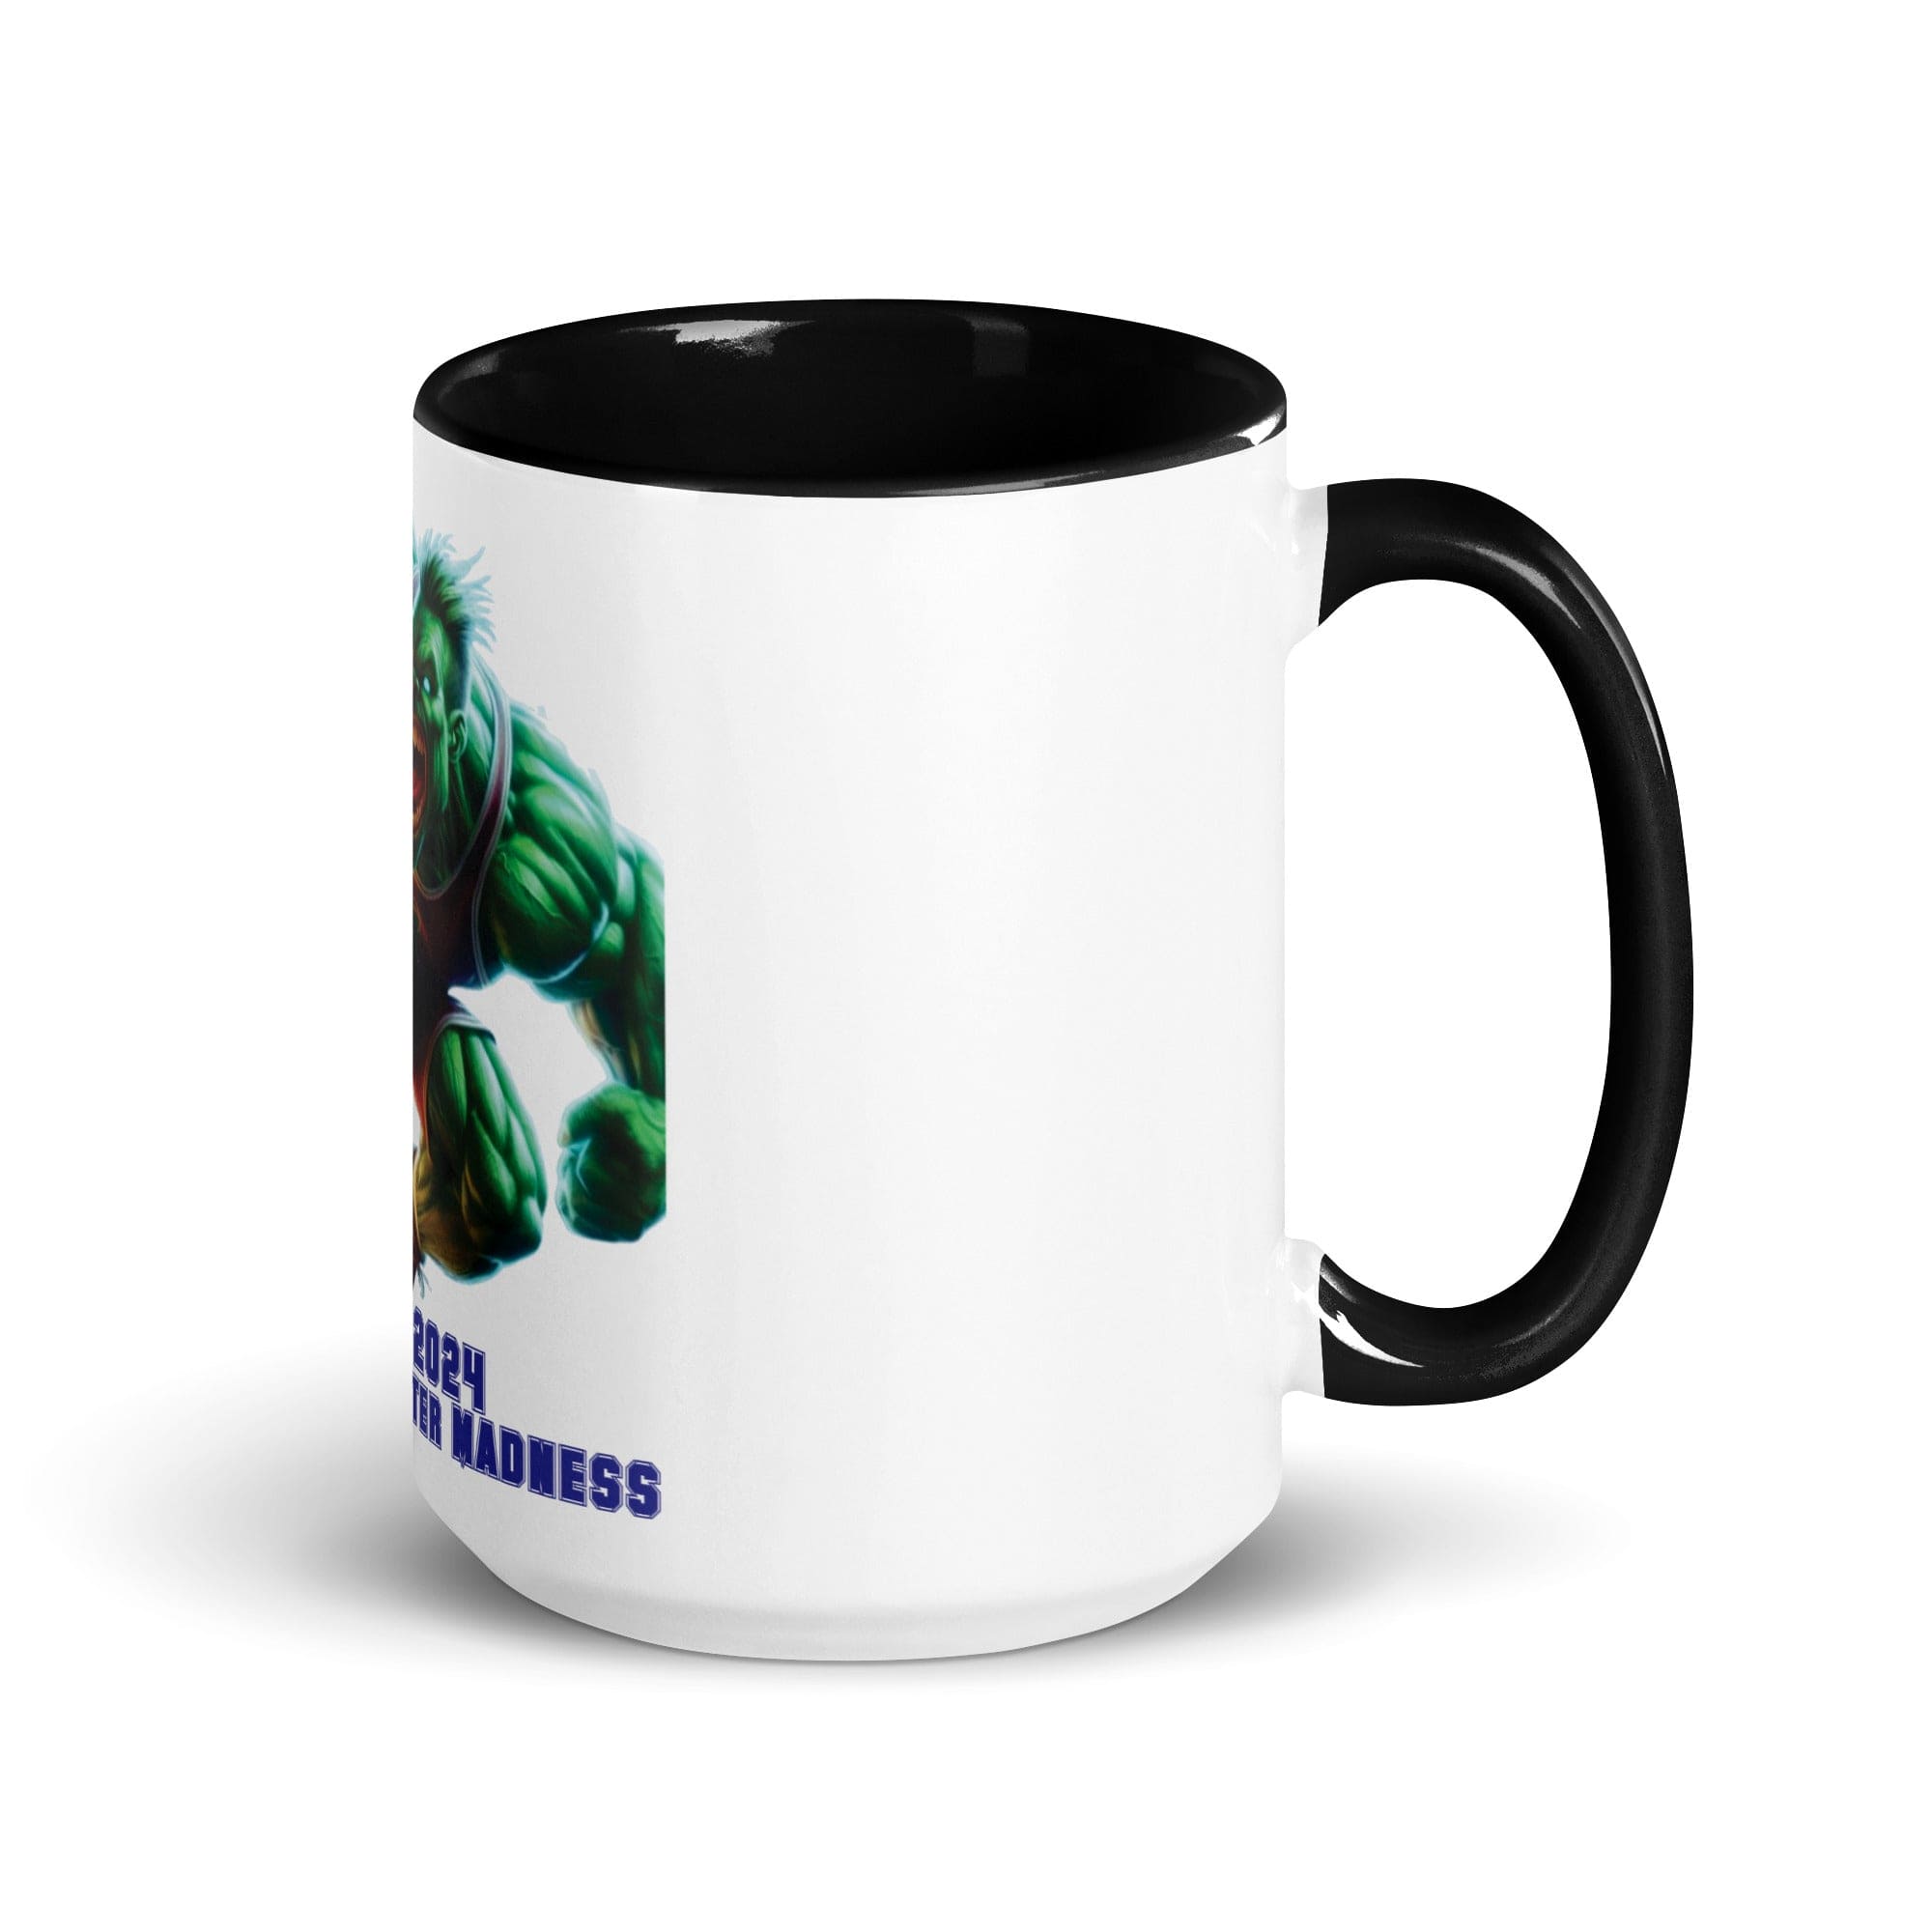 Personalized Mugs with Vibrant Color Inside